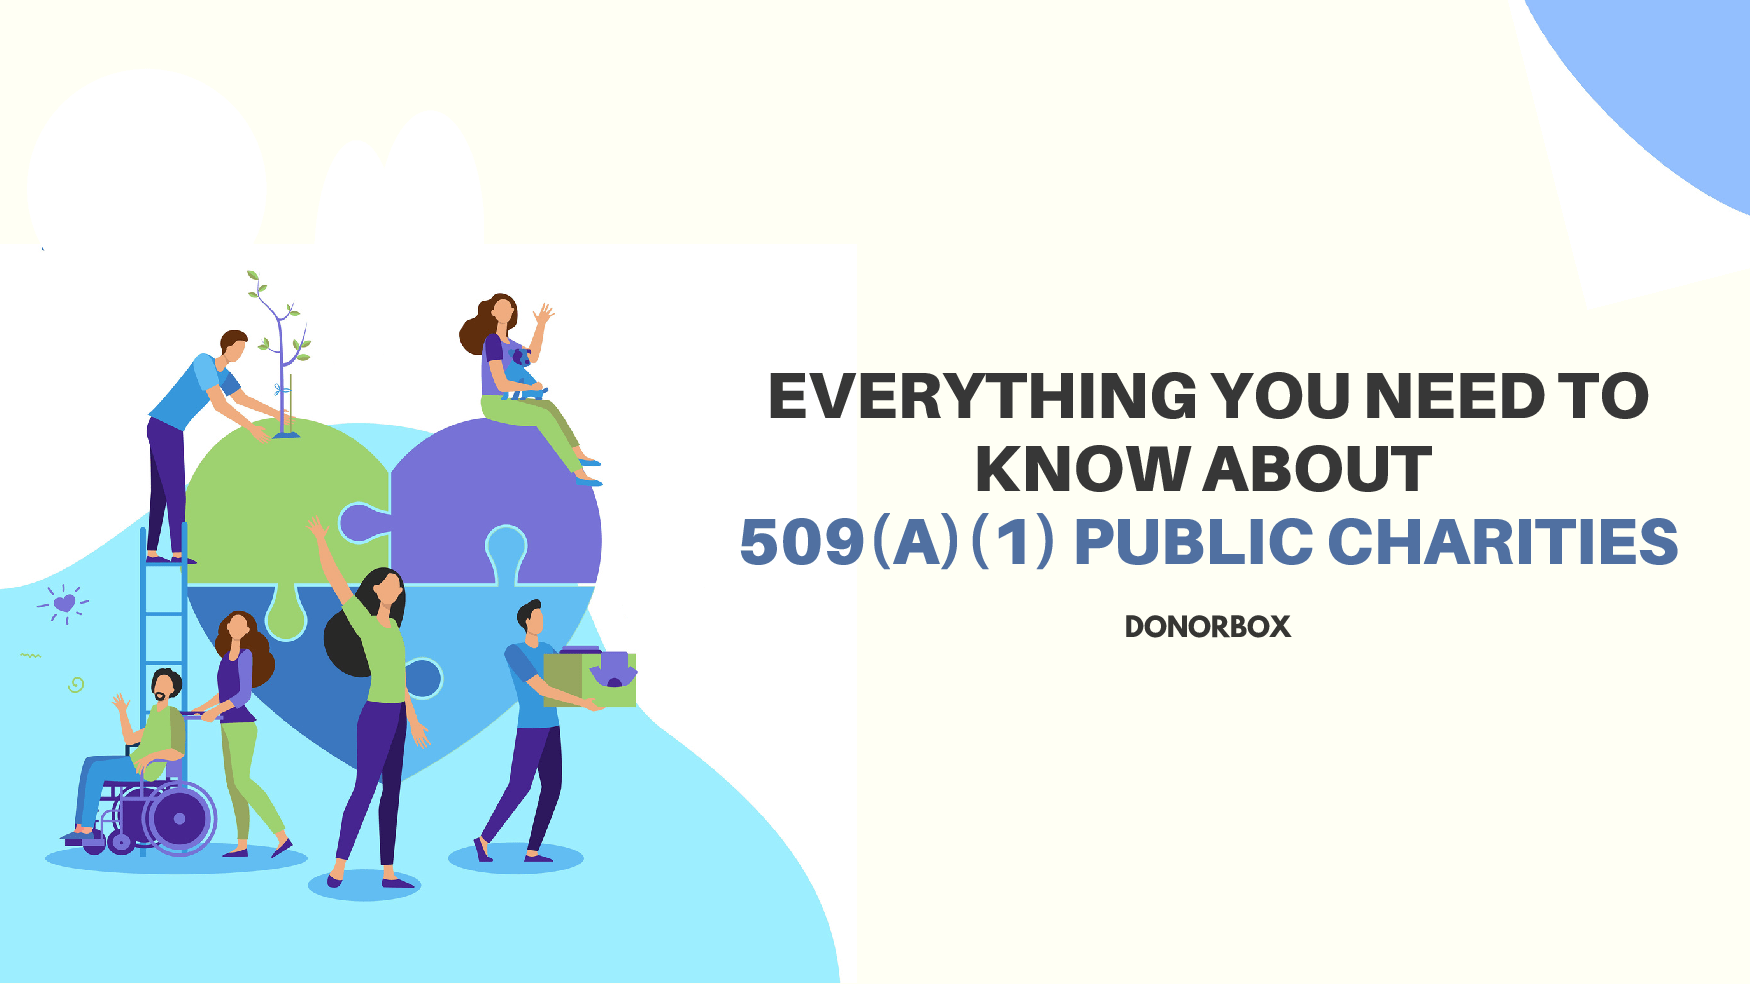 Everything You Need to Know about 509(a)(1) Public Charities